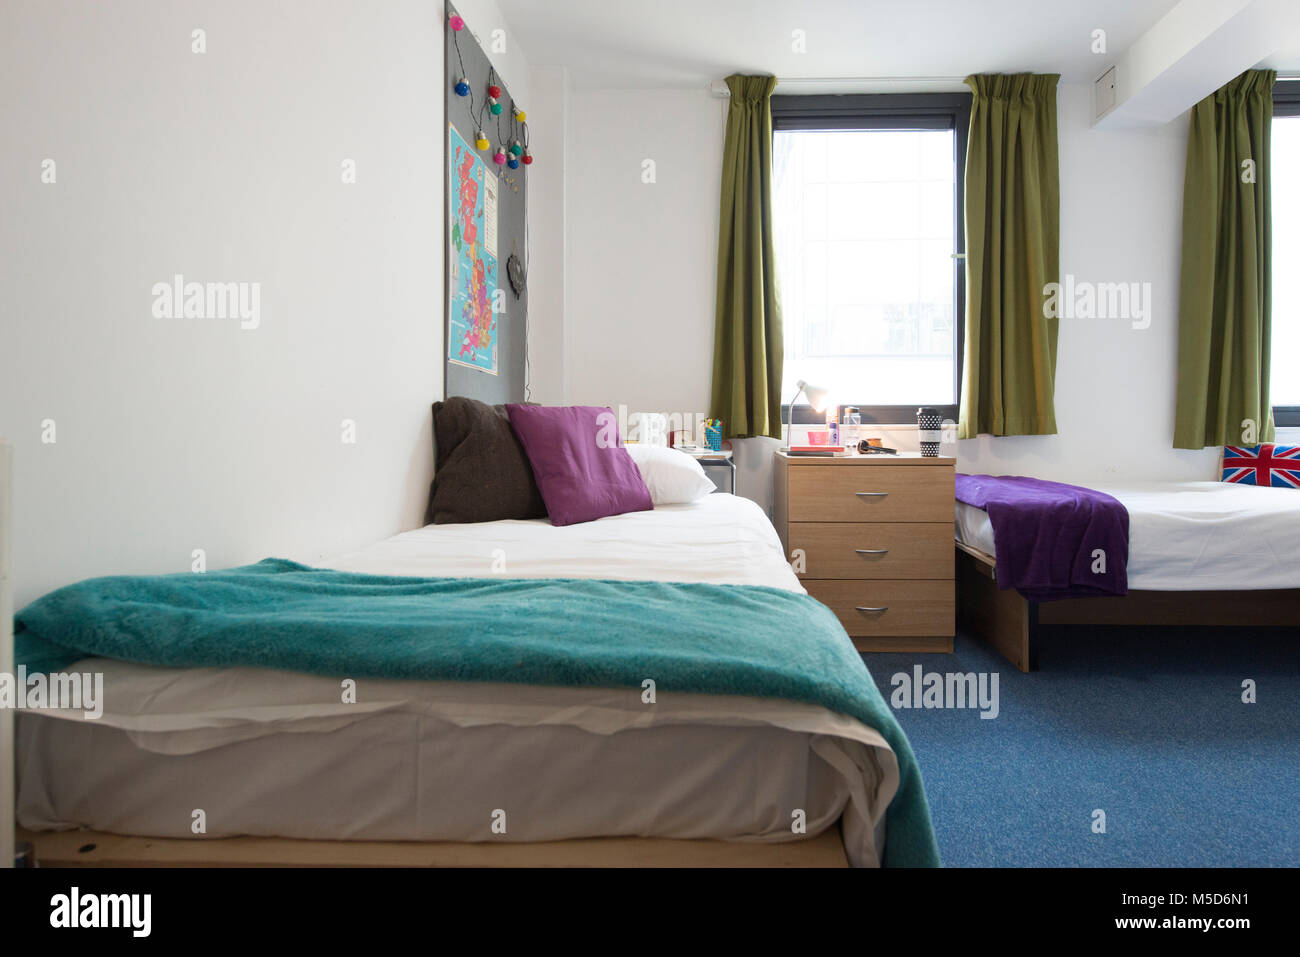 school / college dormitory at a boarding school for students Stock Photo